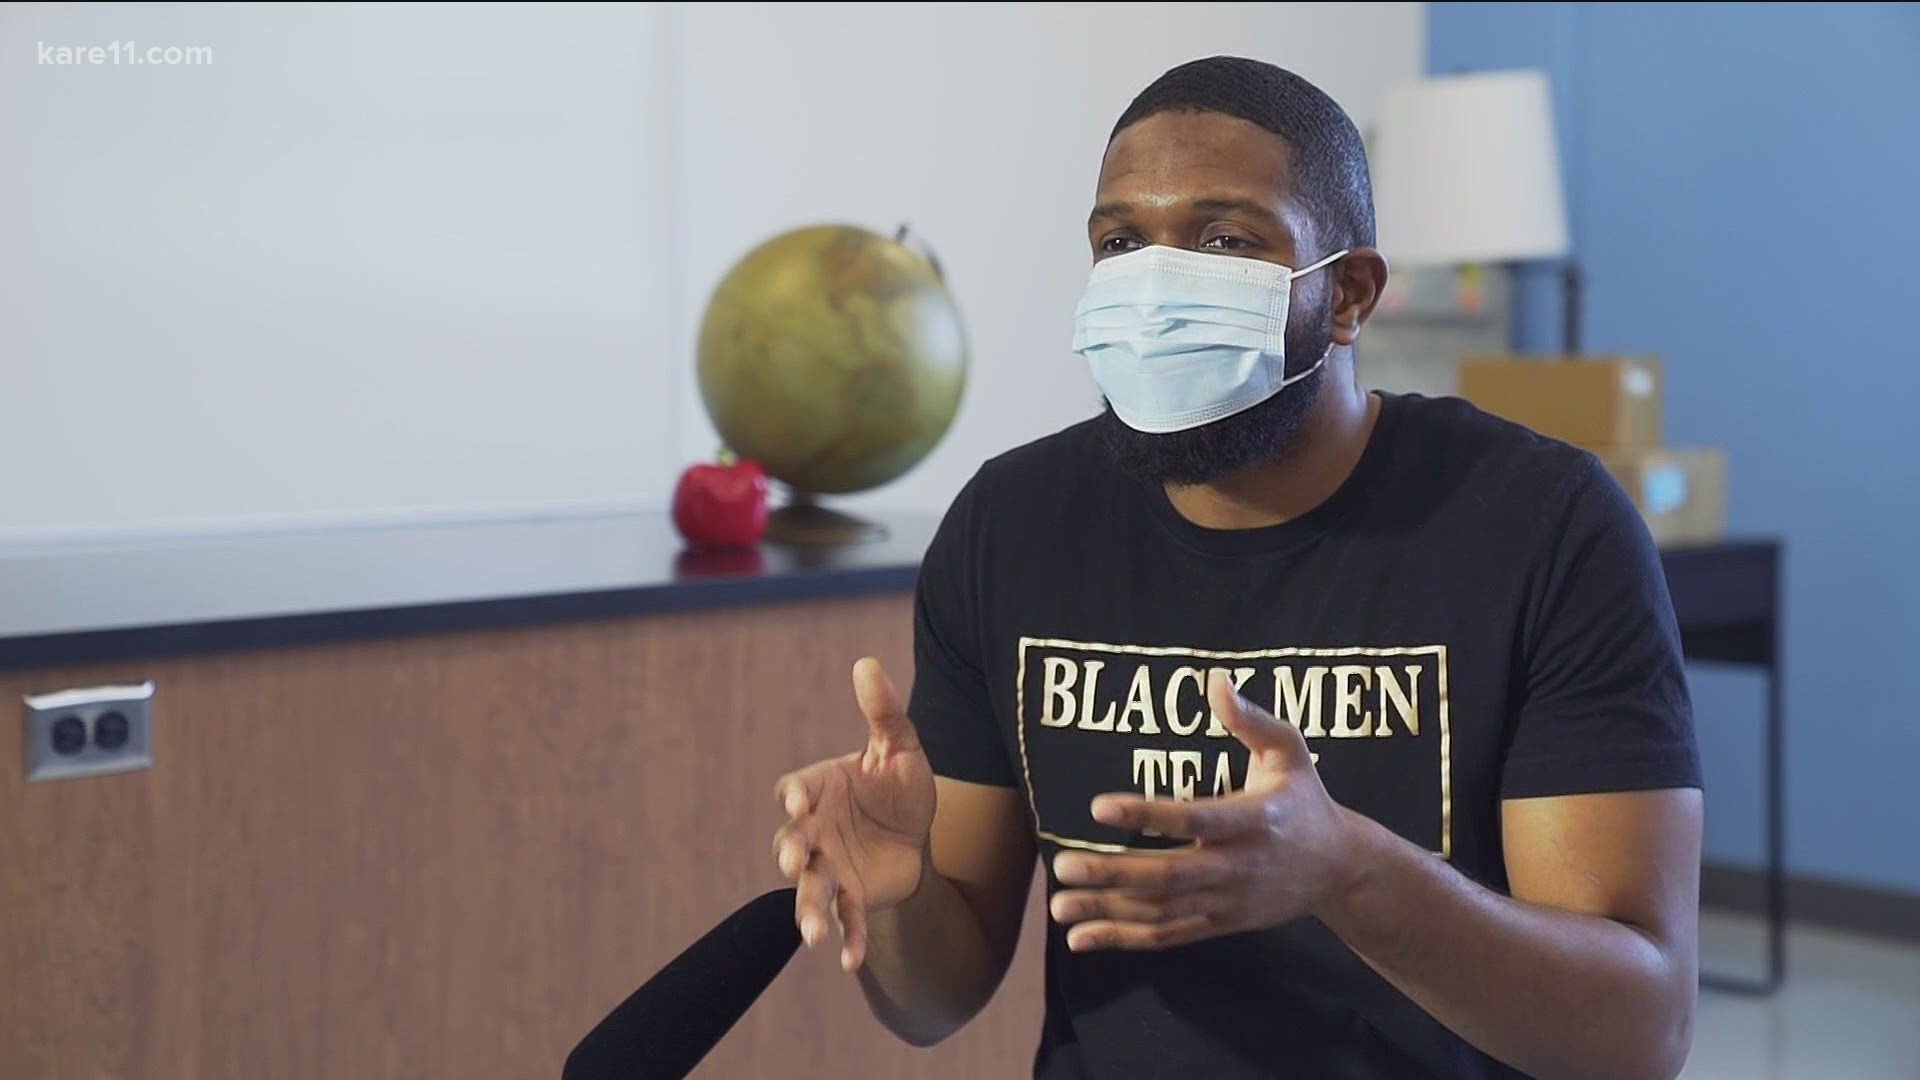 Black Men Teach hopes to help close the achievement gap in Minnesota schools by encouraging more Black men to pursue a career in education.